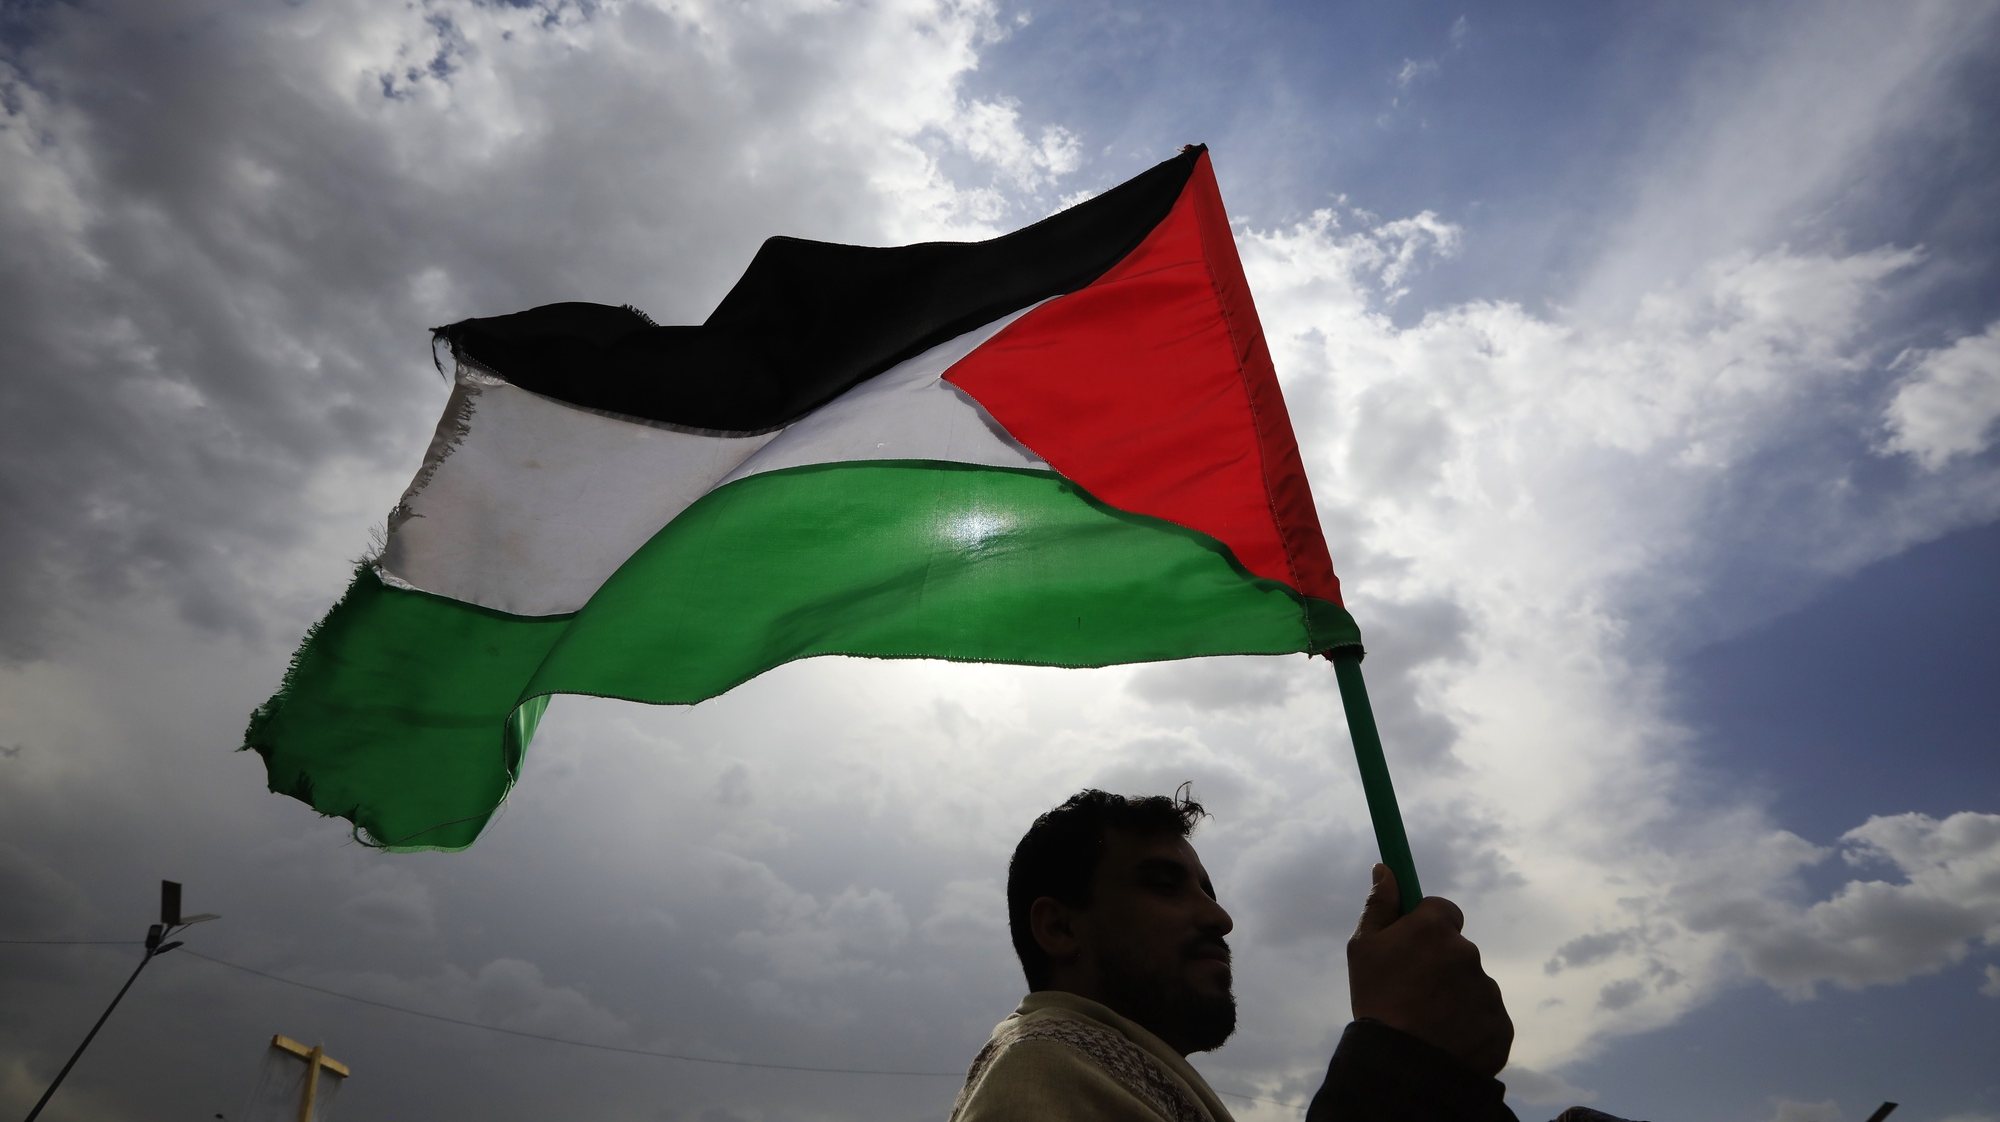 epa11366829 A Houthi supporter waves a Palestinian flag during a rally in solidarity with the Palestinian people, in Sana&#039;a, Yemen, 24 May 2024. Thousands of Houthi supporters participated in a solidarity protest to support the Palestinian people in the midst of the current conflict between Israel and Hamas in the Gaza Strip. Houthisâ€™ leader, Abdul-Malik al-Houthi, claimed in a televised speech on 23 May that Yemen&#039;s Houthis have launched eight attacks against ships sailing in the Red Sea, the Gulf of Aden, and the Indian Ocean in the previous week, as well as an attack targeting the Mediterranean Sea, aiming to halting Israelâ€™s operations in Gaza.  EPA/YAHYA ARHAB